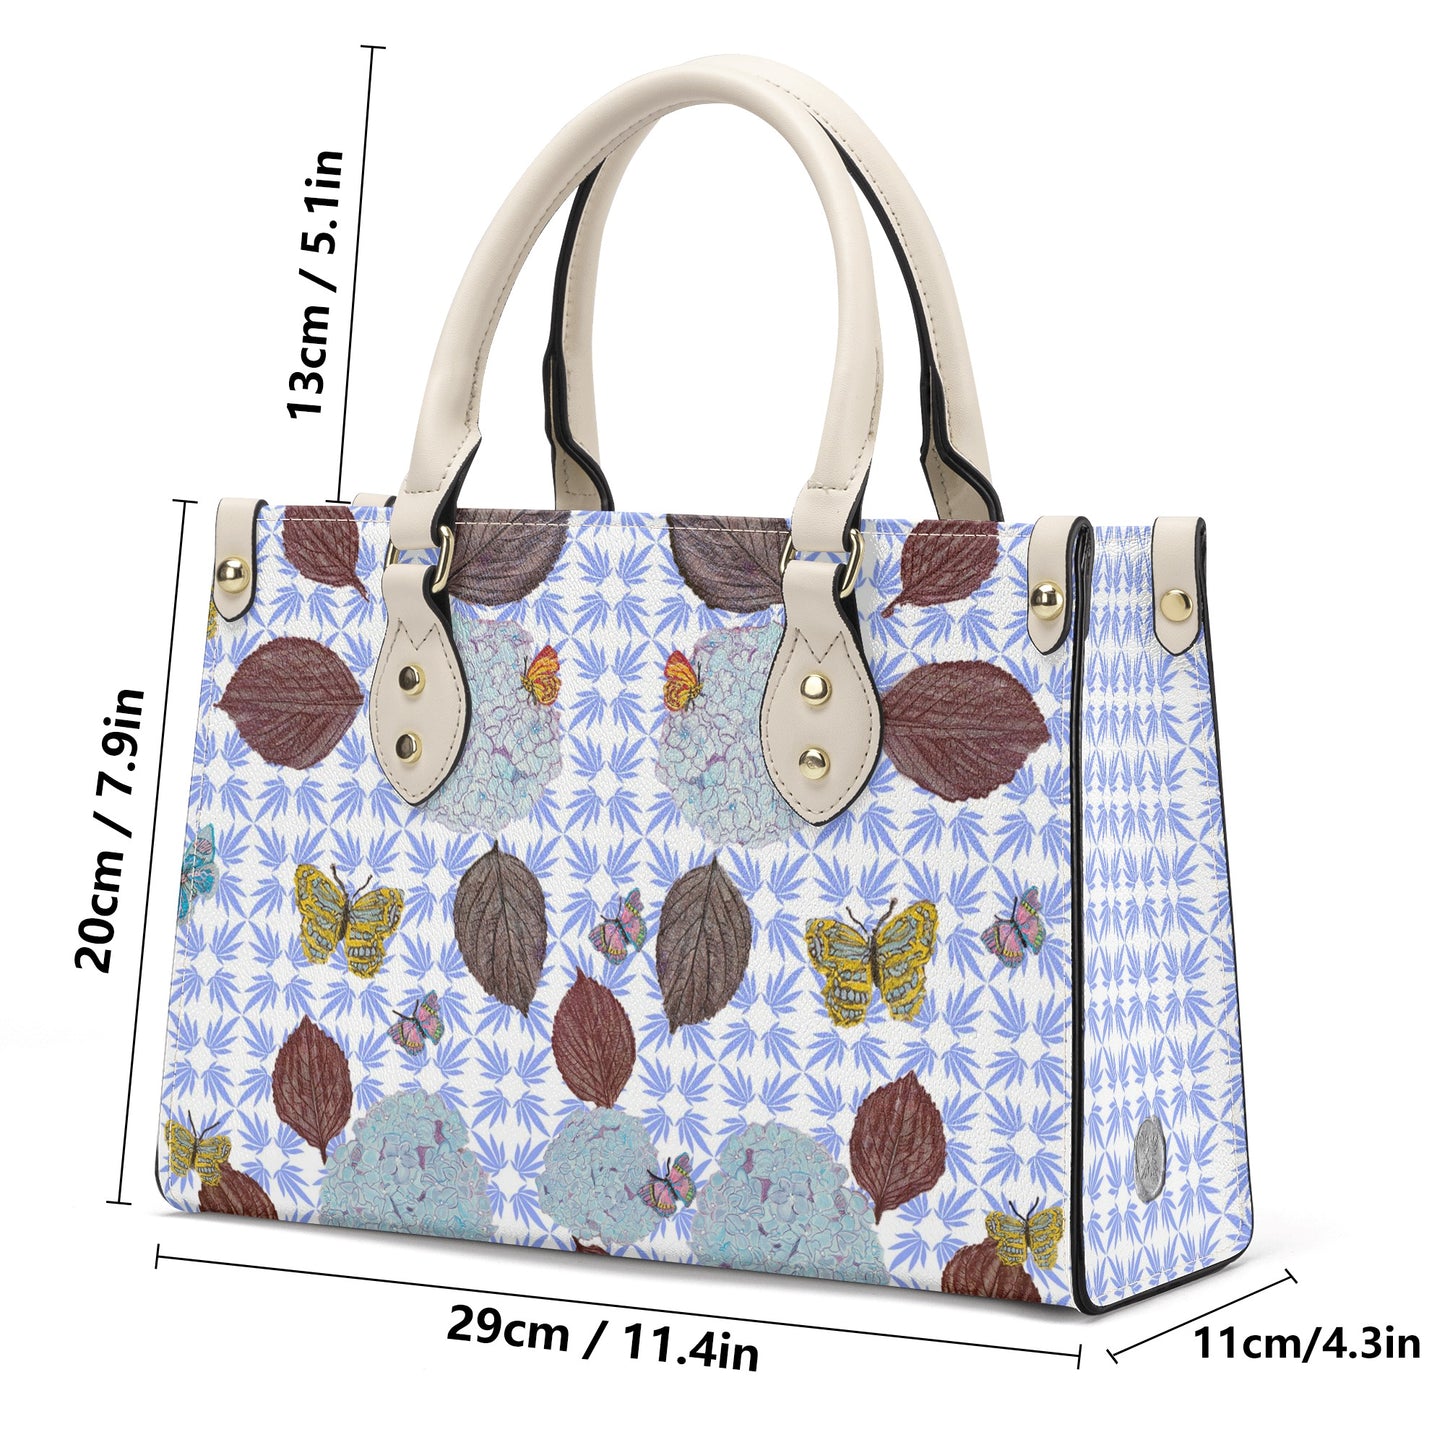 Leather Tote with Aubergine Hydrangea Leaves, Flora and Fauna